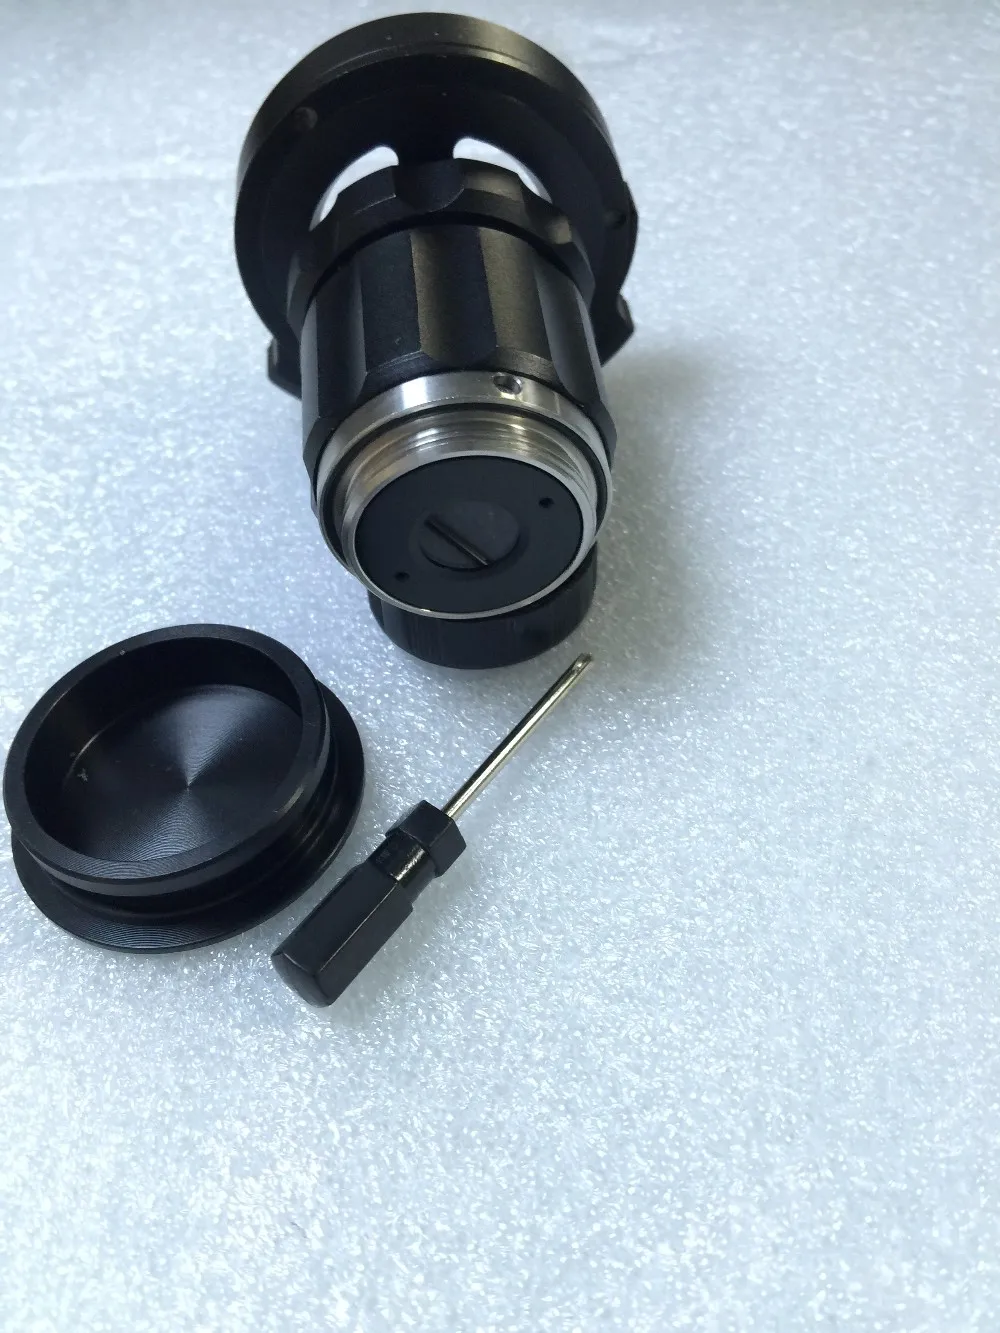 
Zoom Optical Coupler F15-25mm for endoscope 